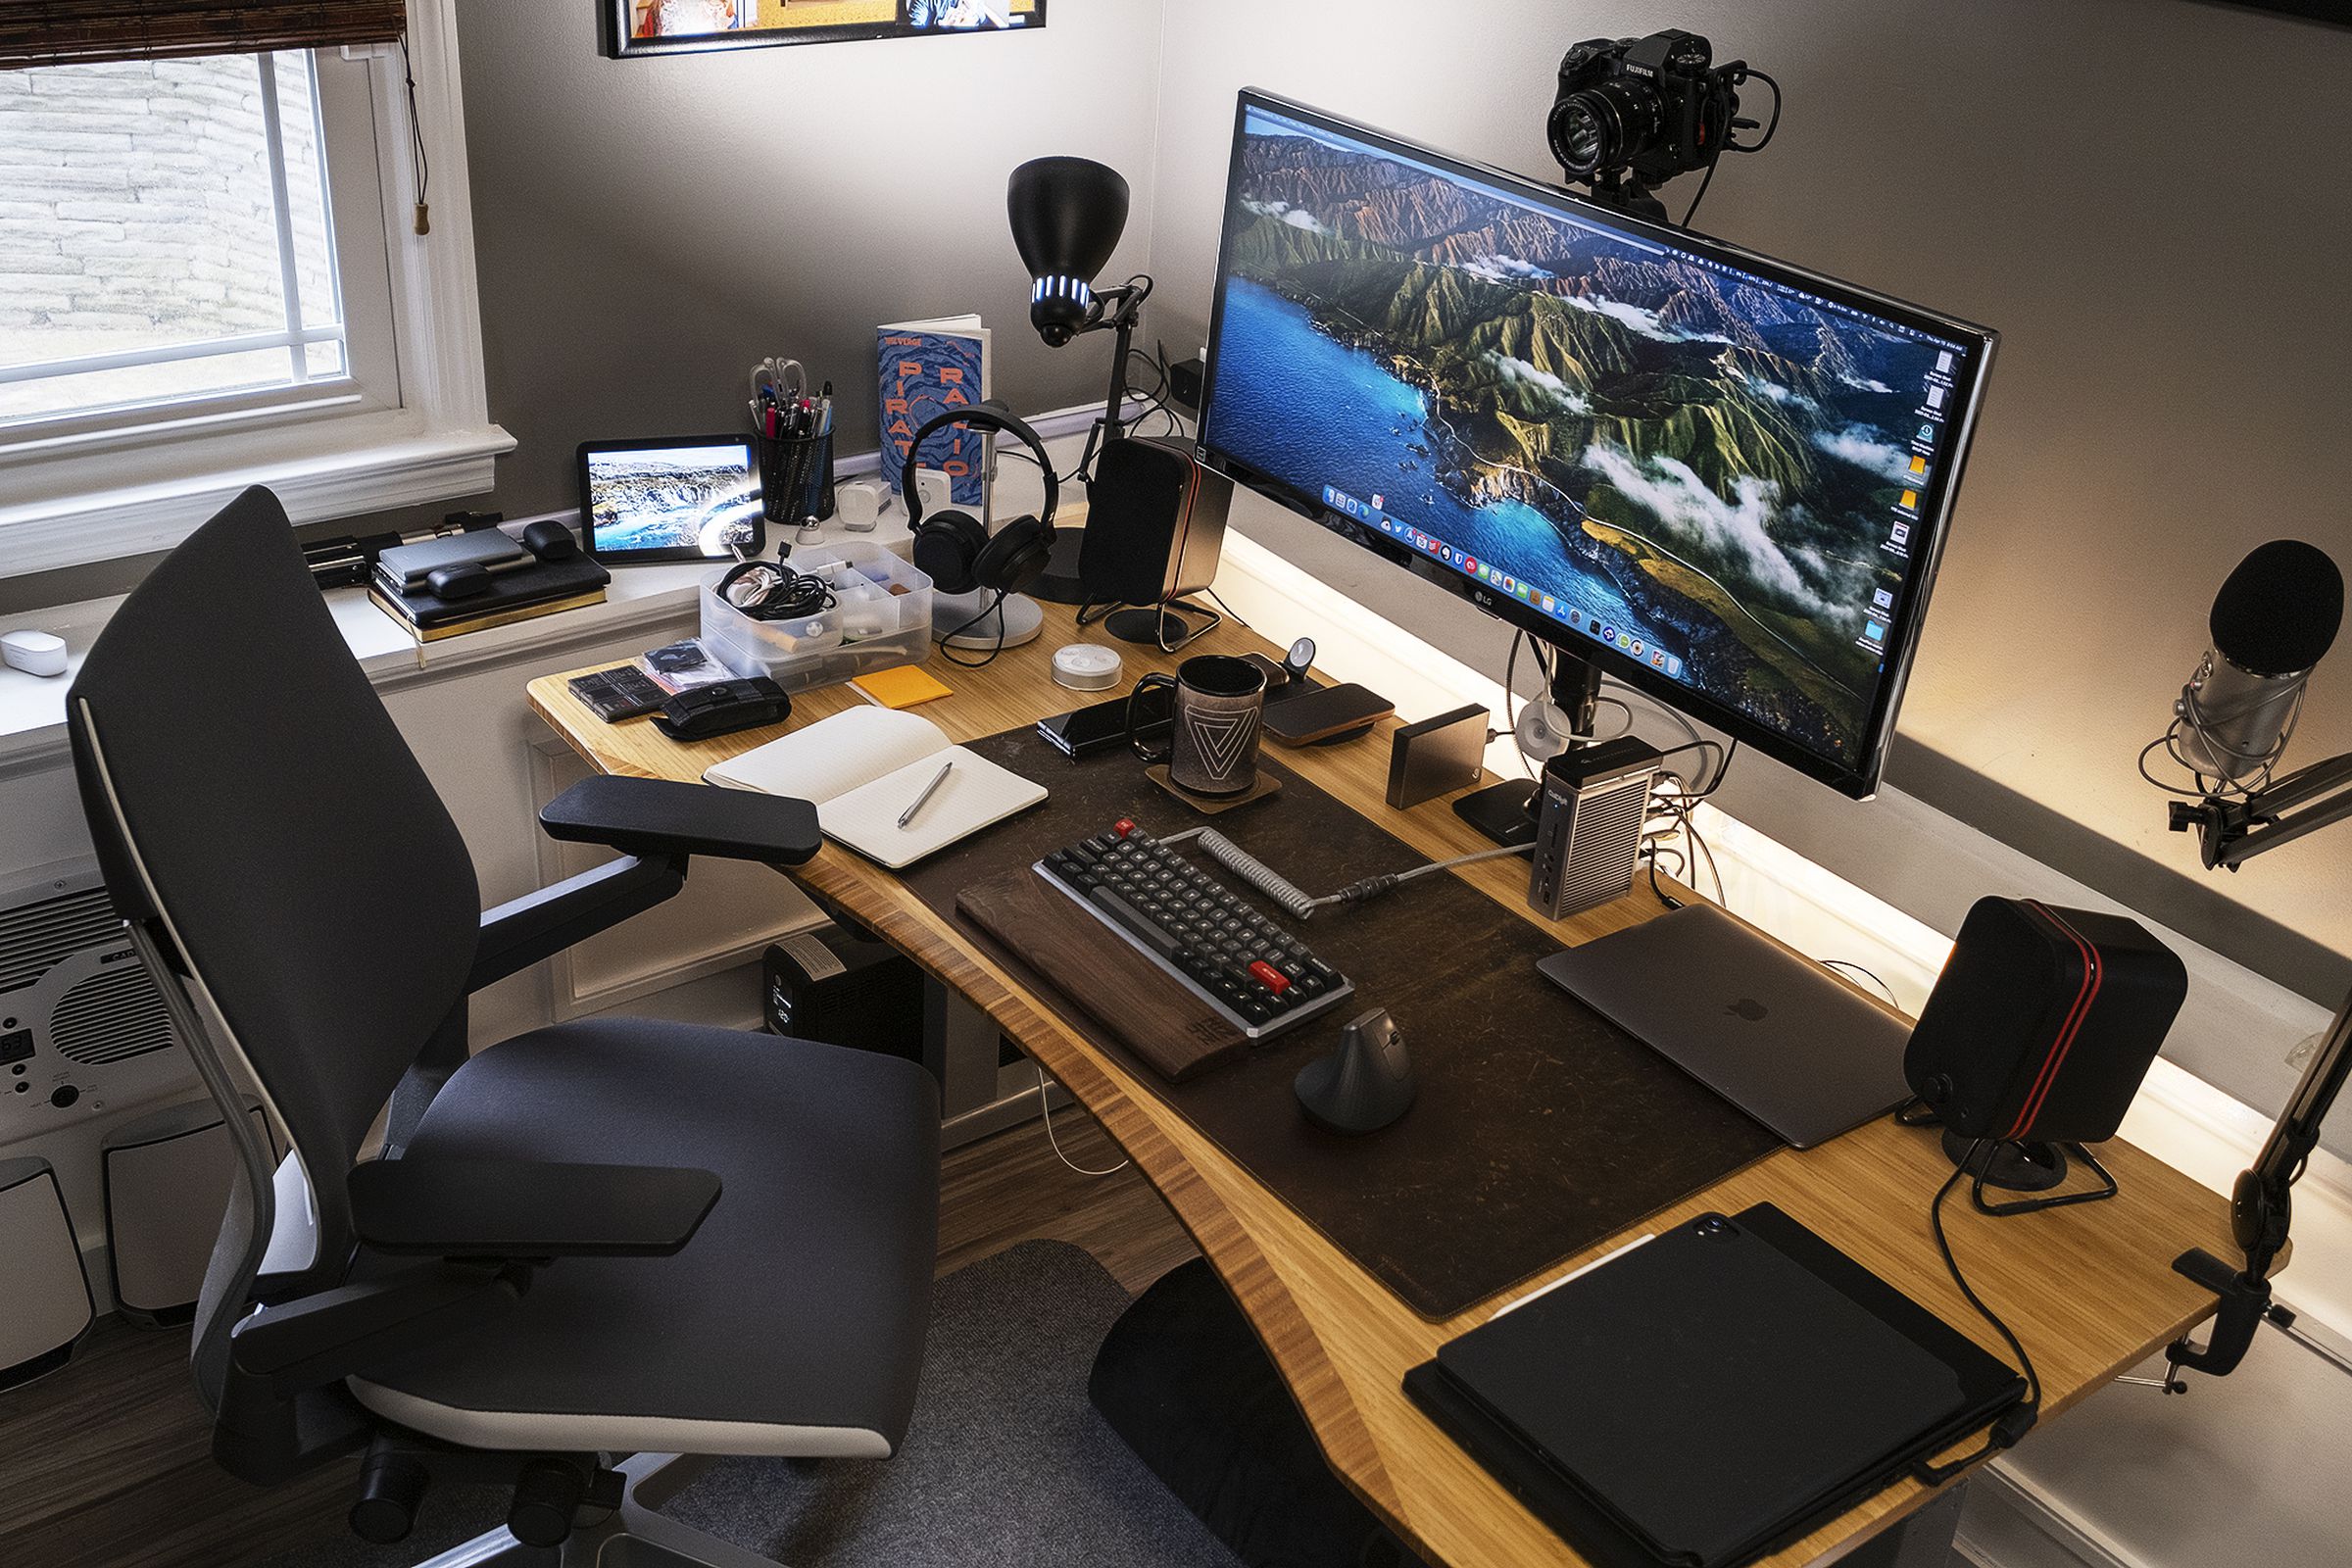 Dan’s desk is large enough to have space for multiple devices at the same time.